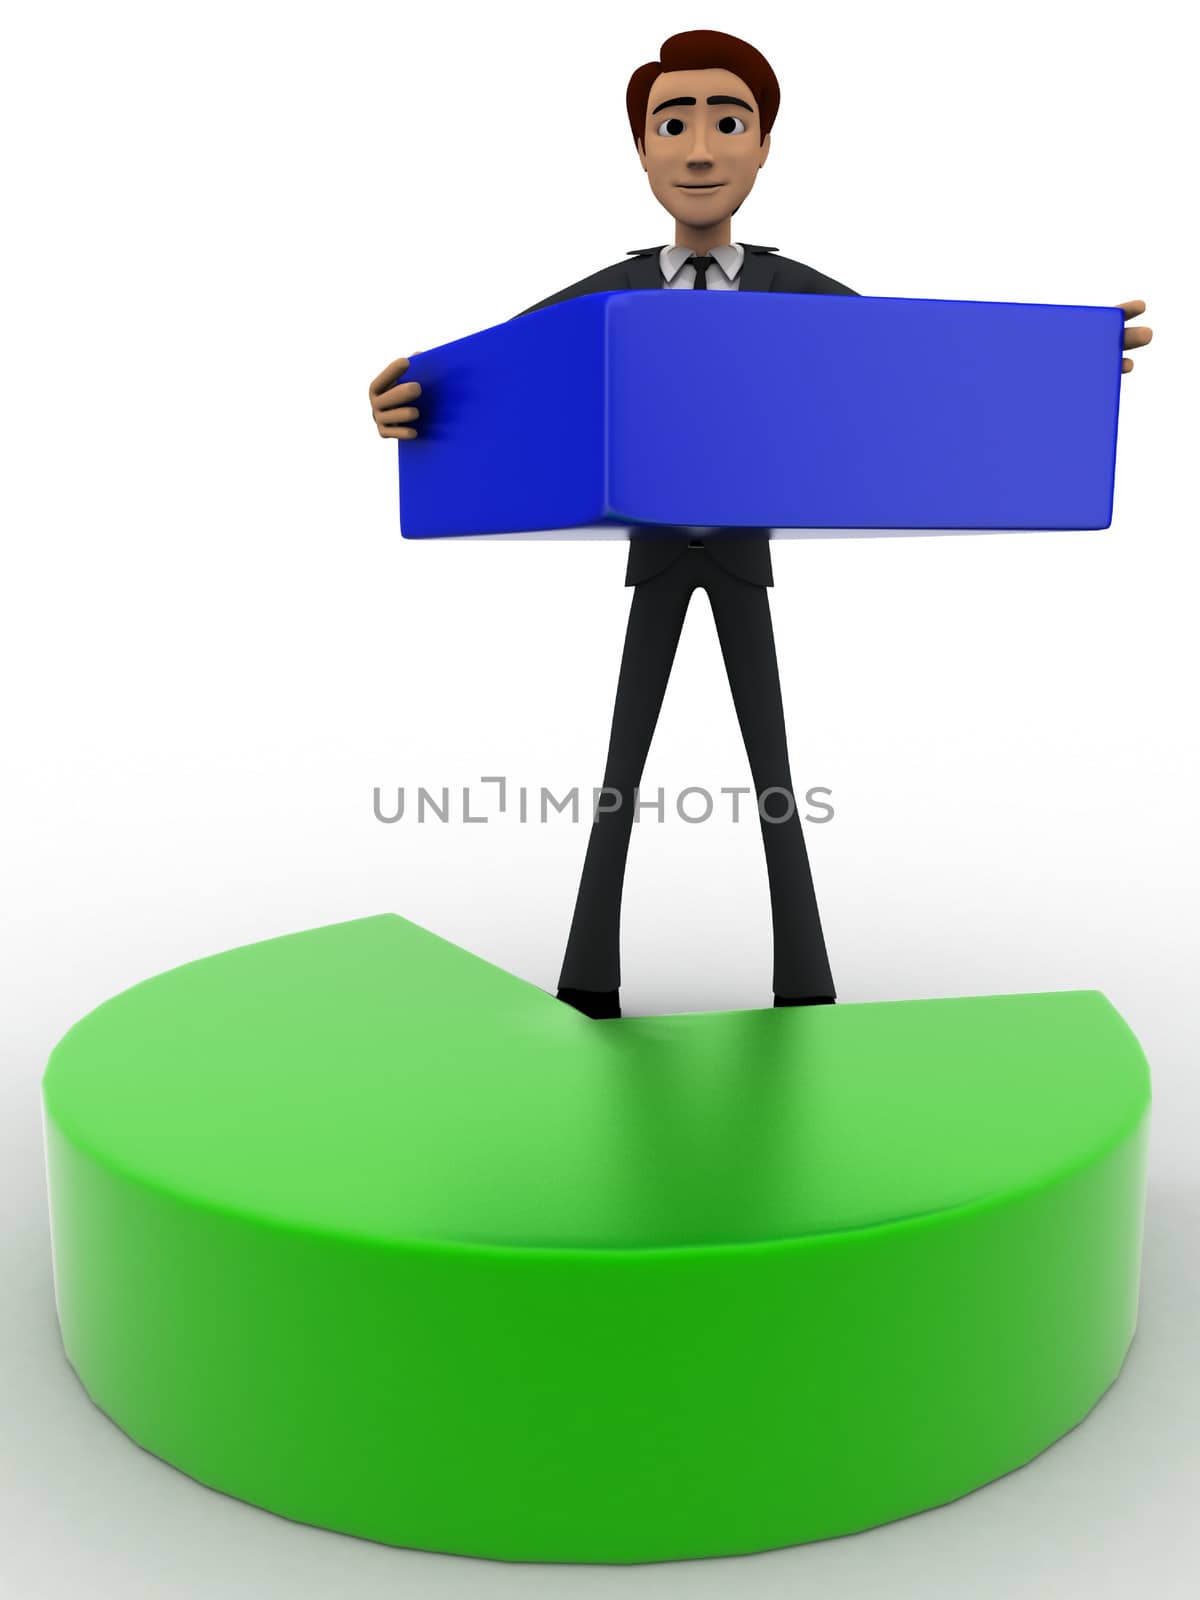 3d man holding small blue part of pie graph concept by touchmenithin@gmail.com